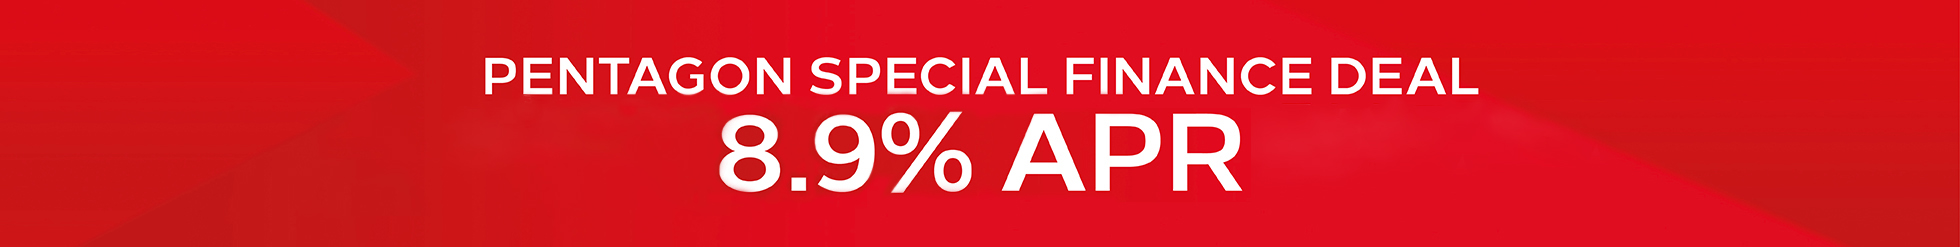 Pentagon Special Offer - Get 8.9% APR Finance On This Fiat Ducato